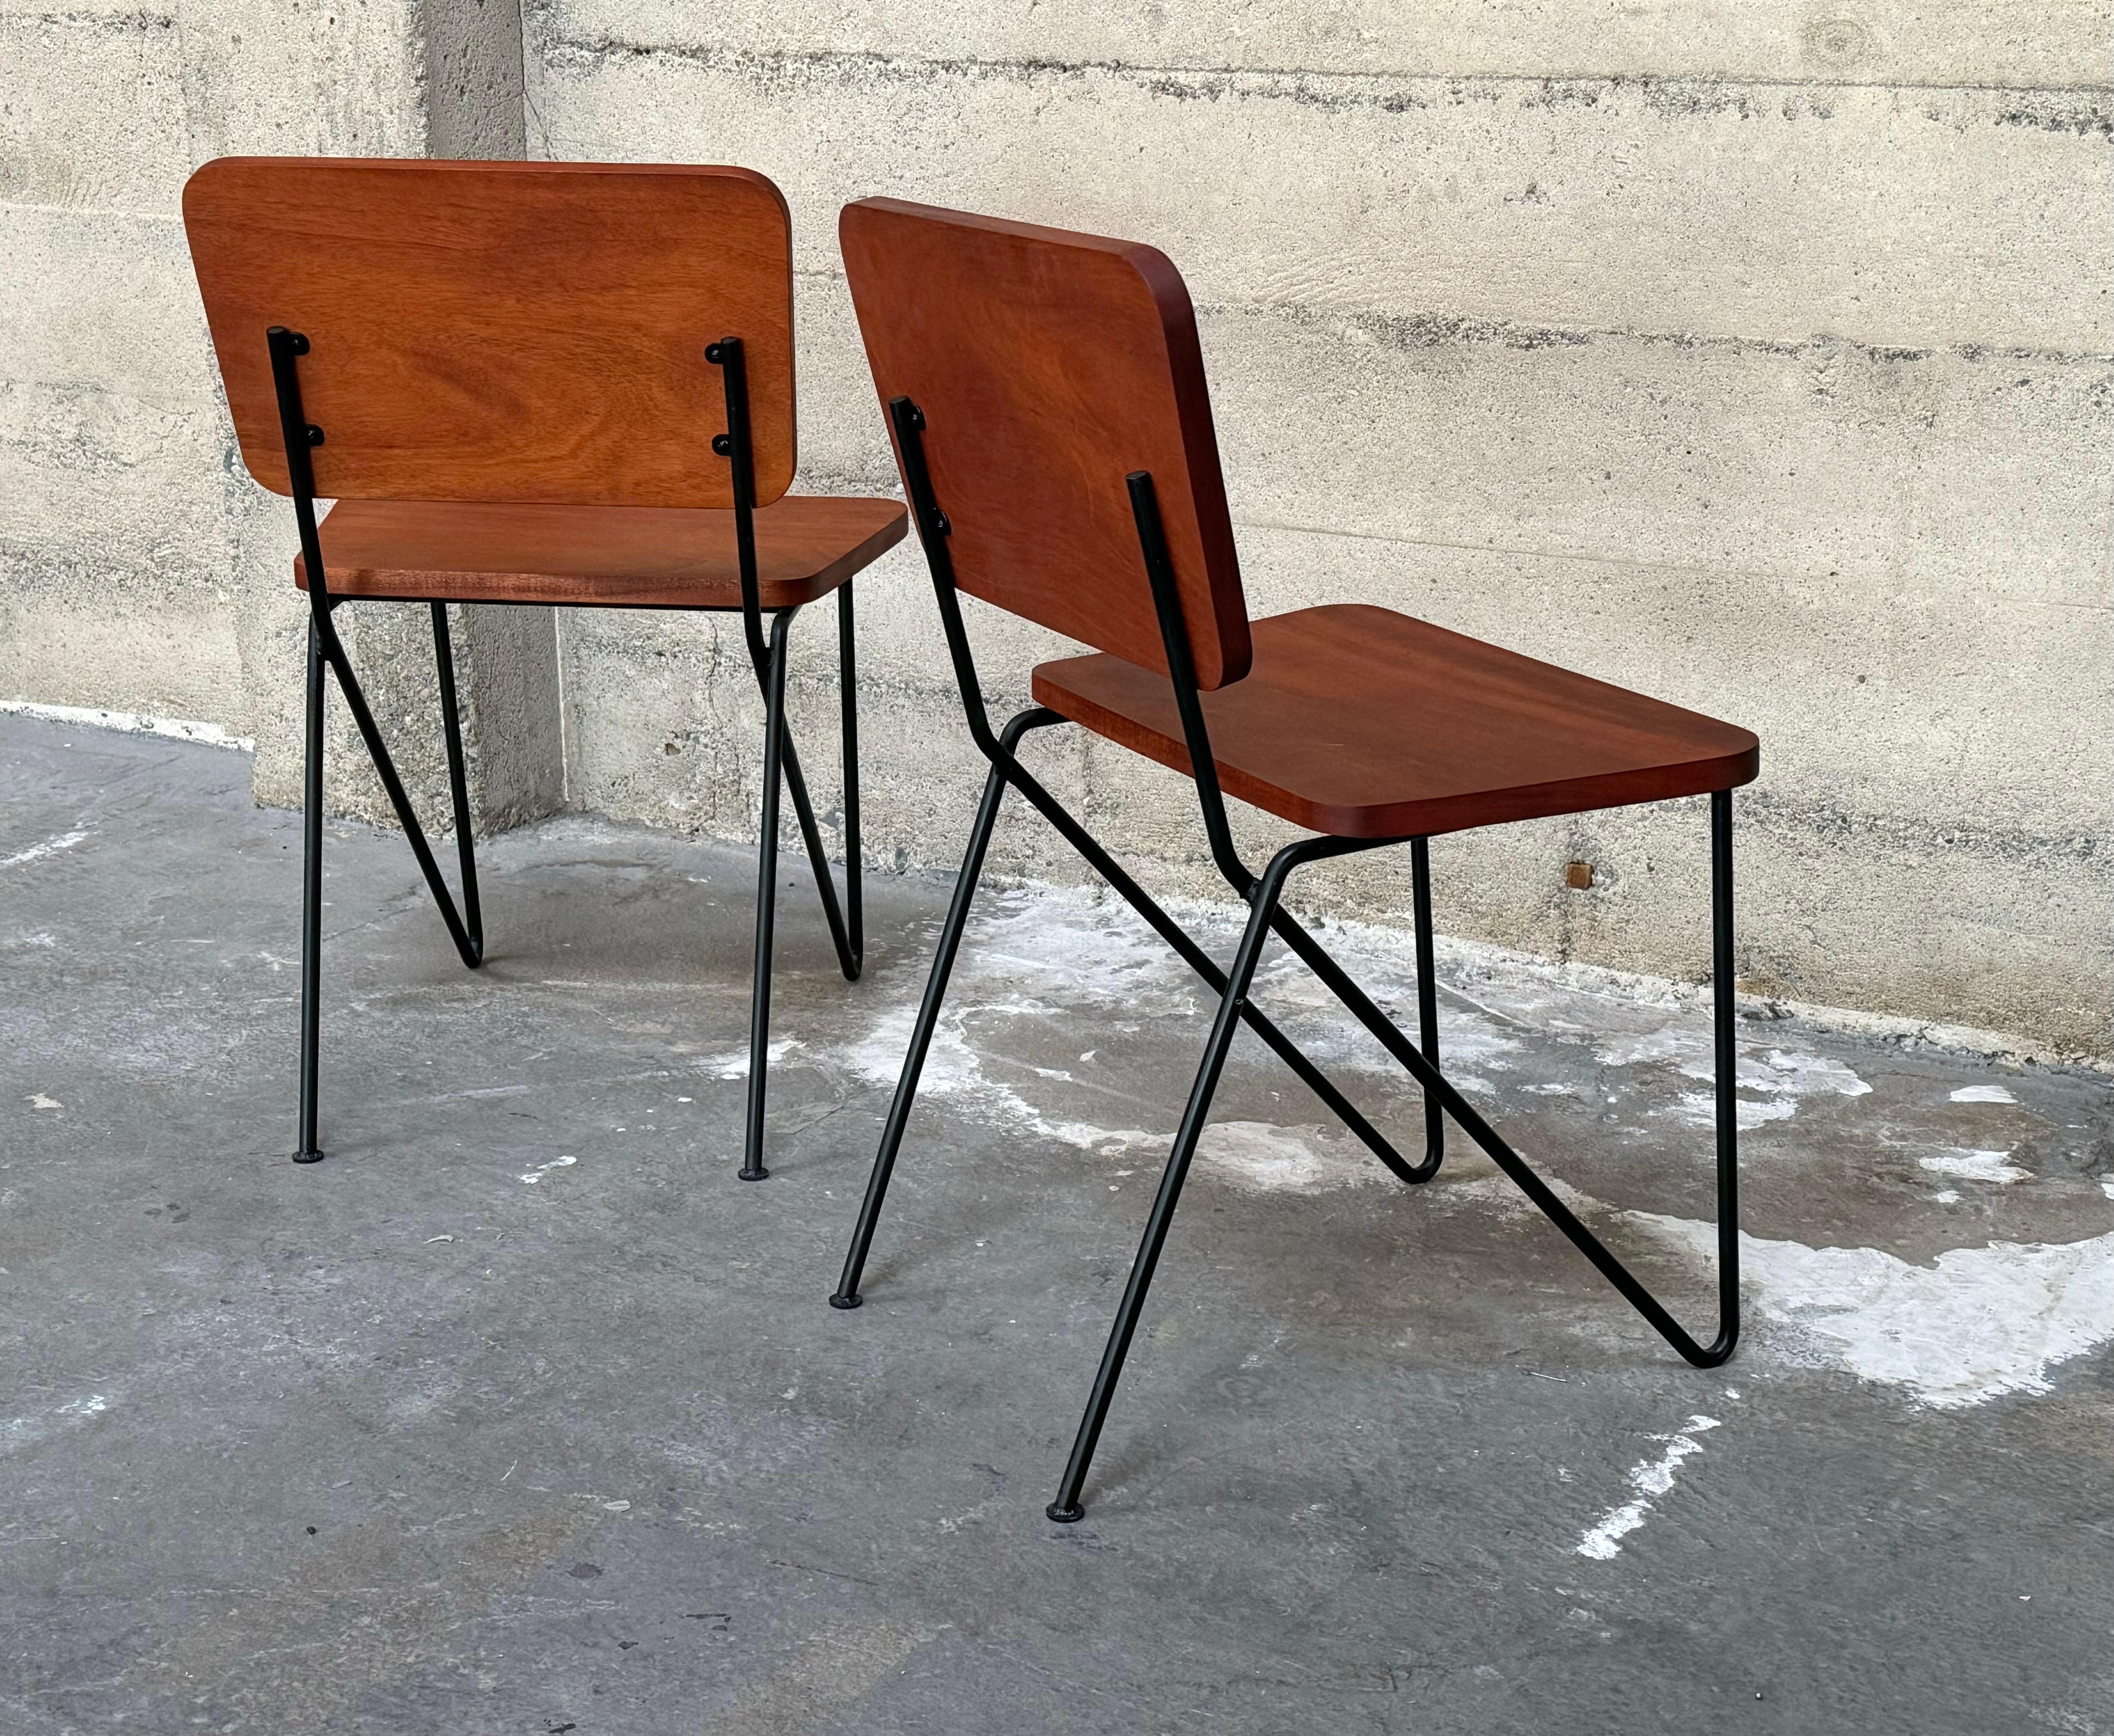 Pair of 1950s California Design Iron and Tropical Hardwood Side Chairs For Sale 2